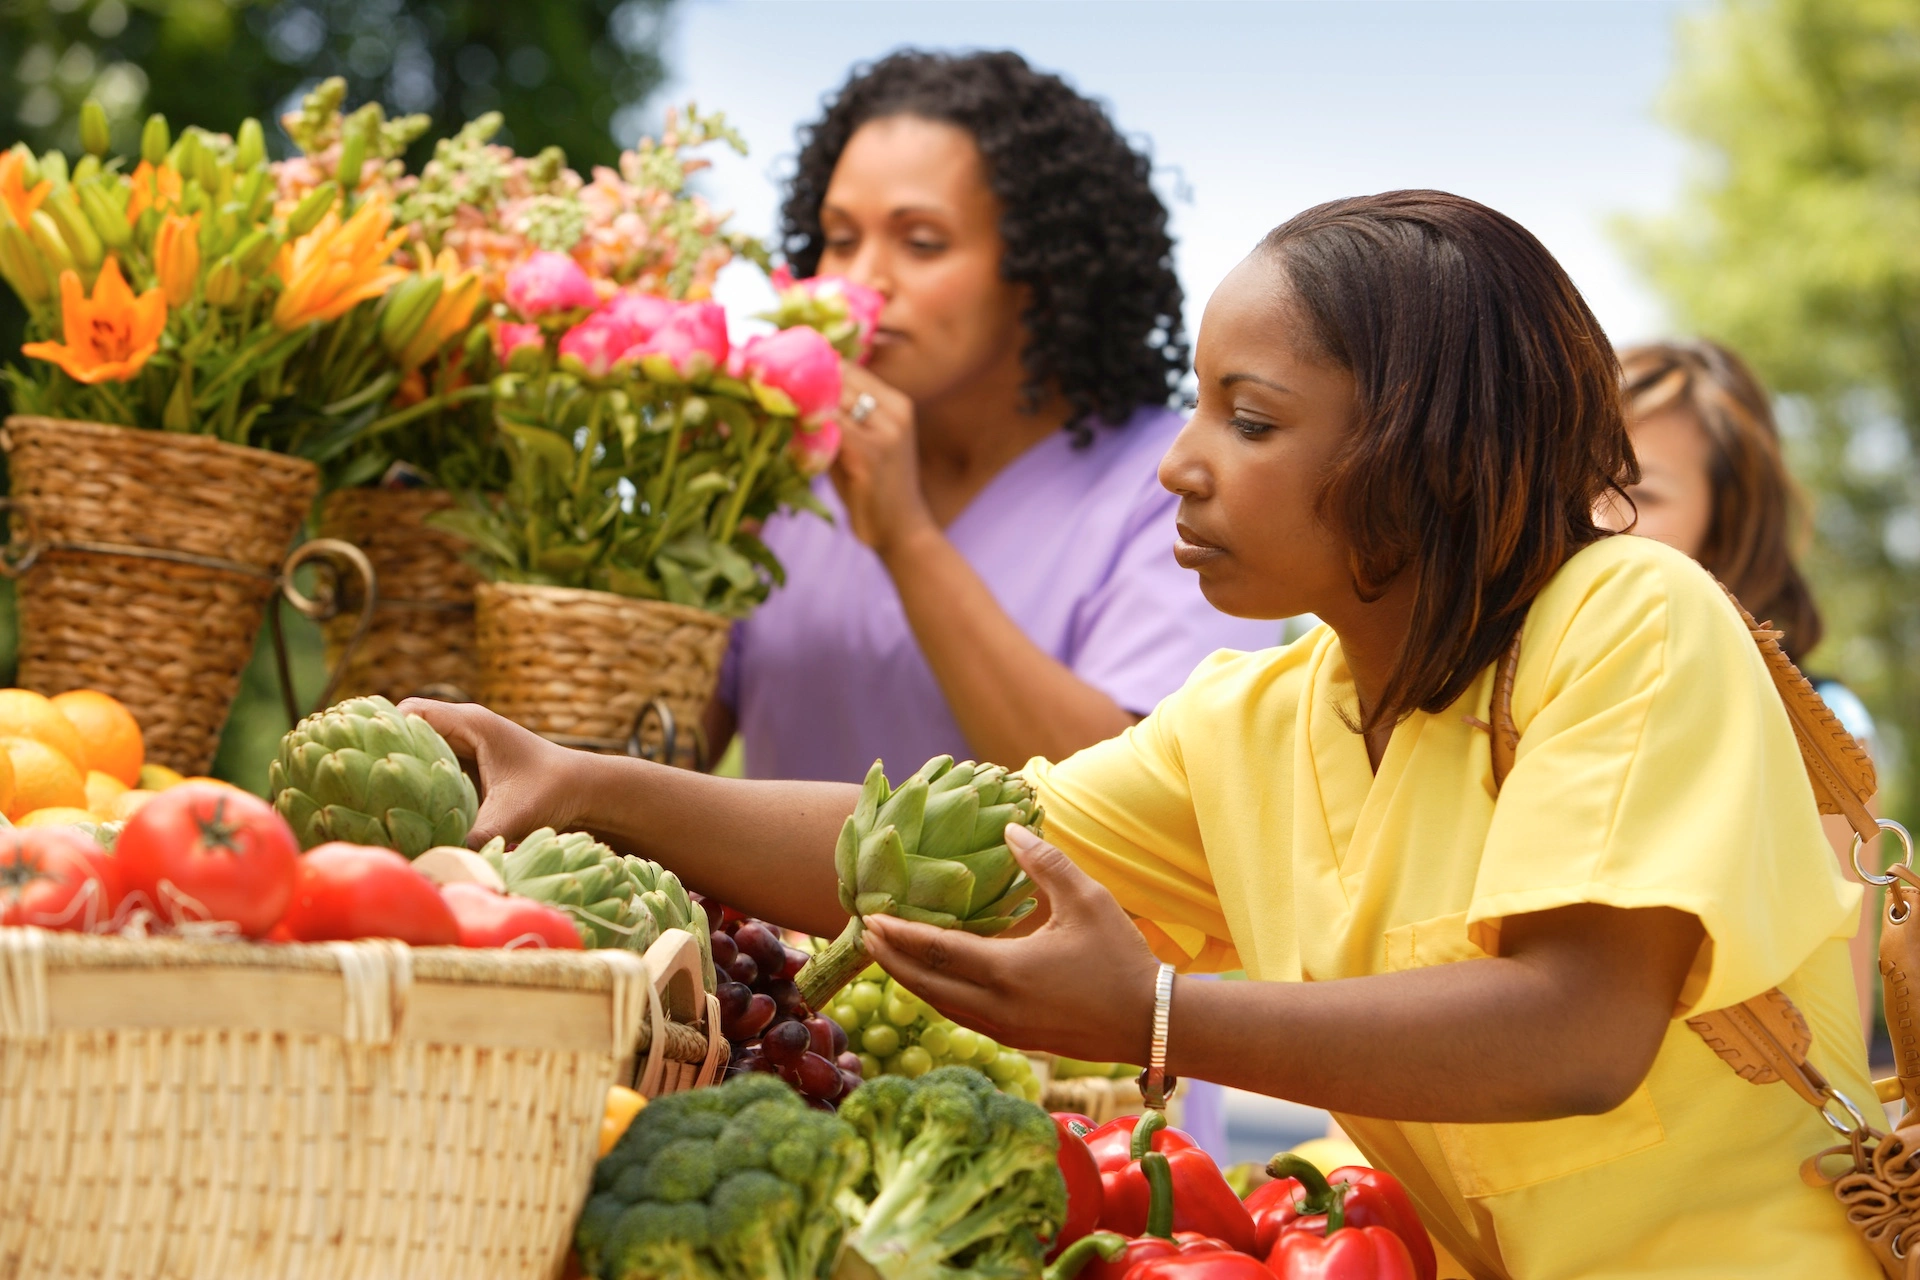 Breast cancer survivors see cardiovascular benefit from heart-healthy diet